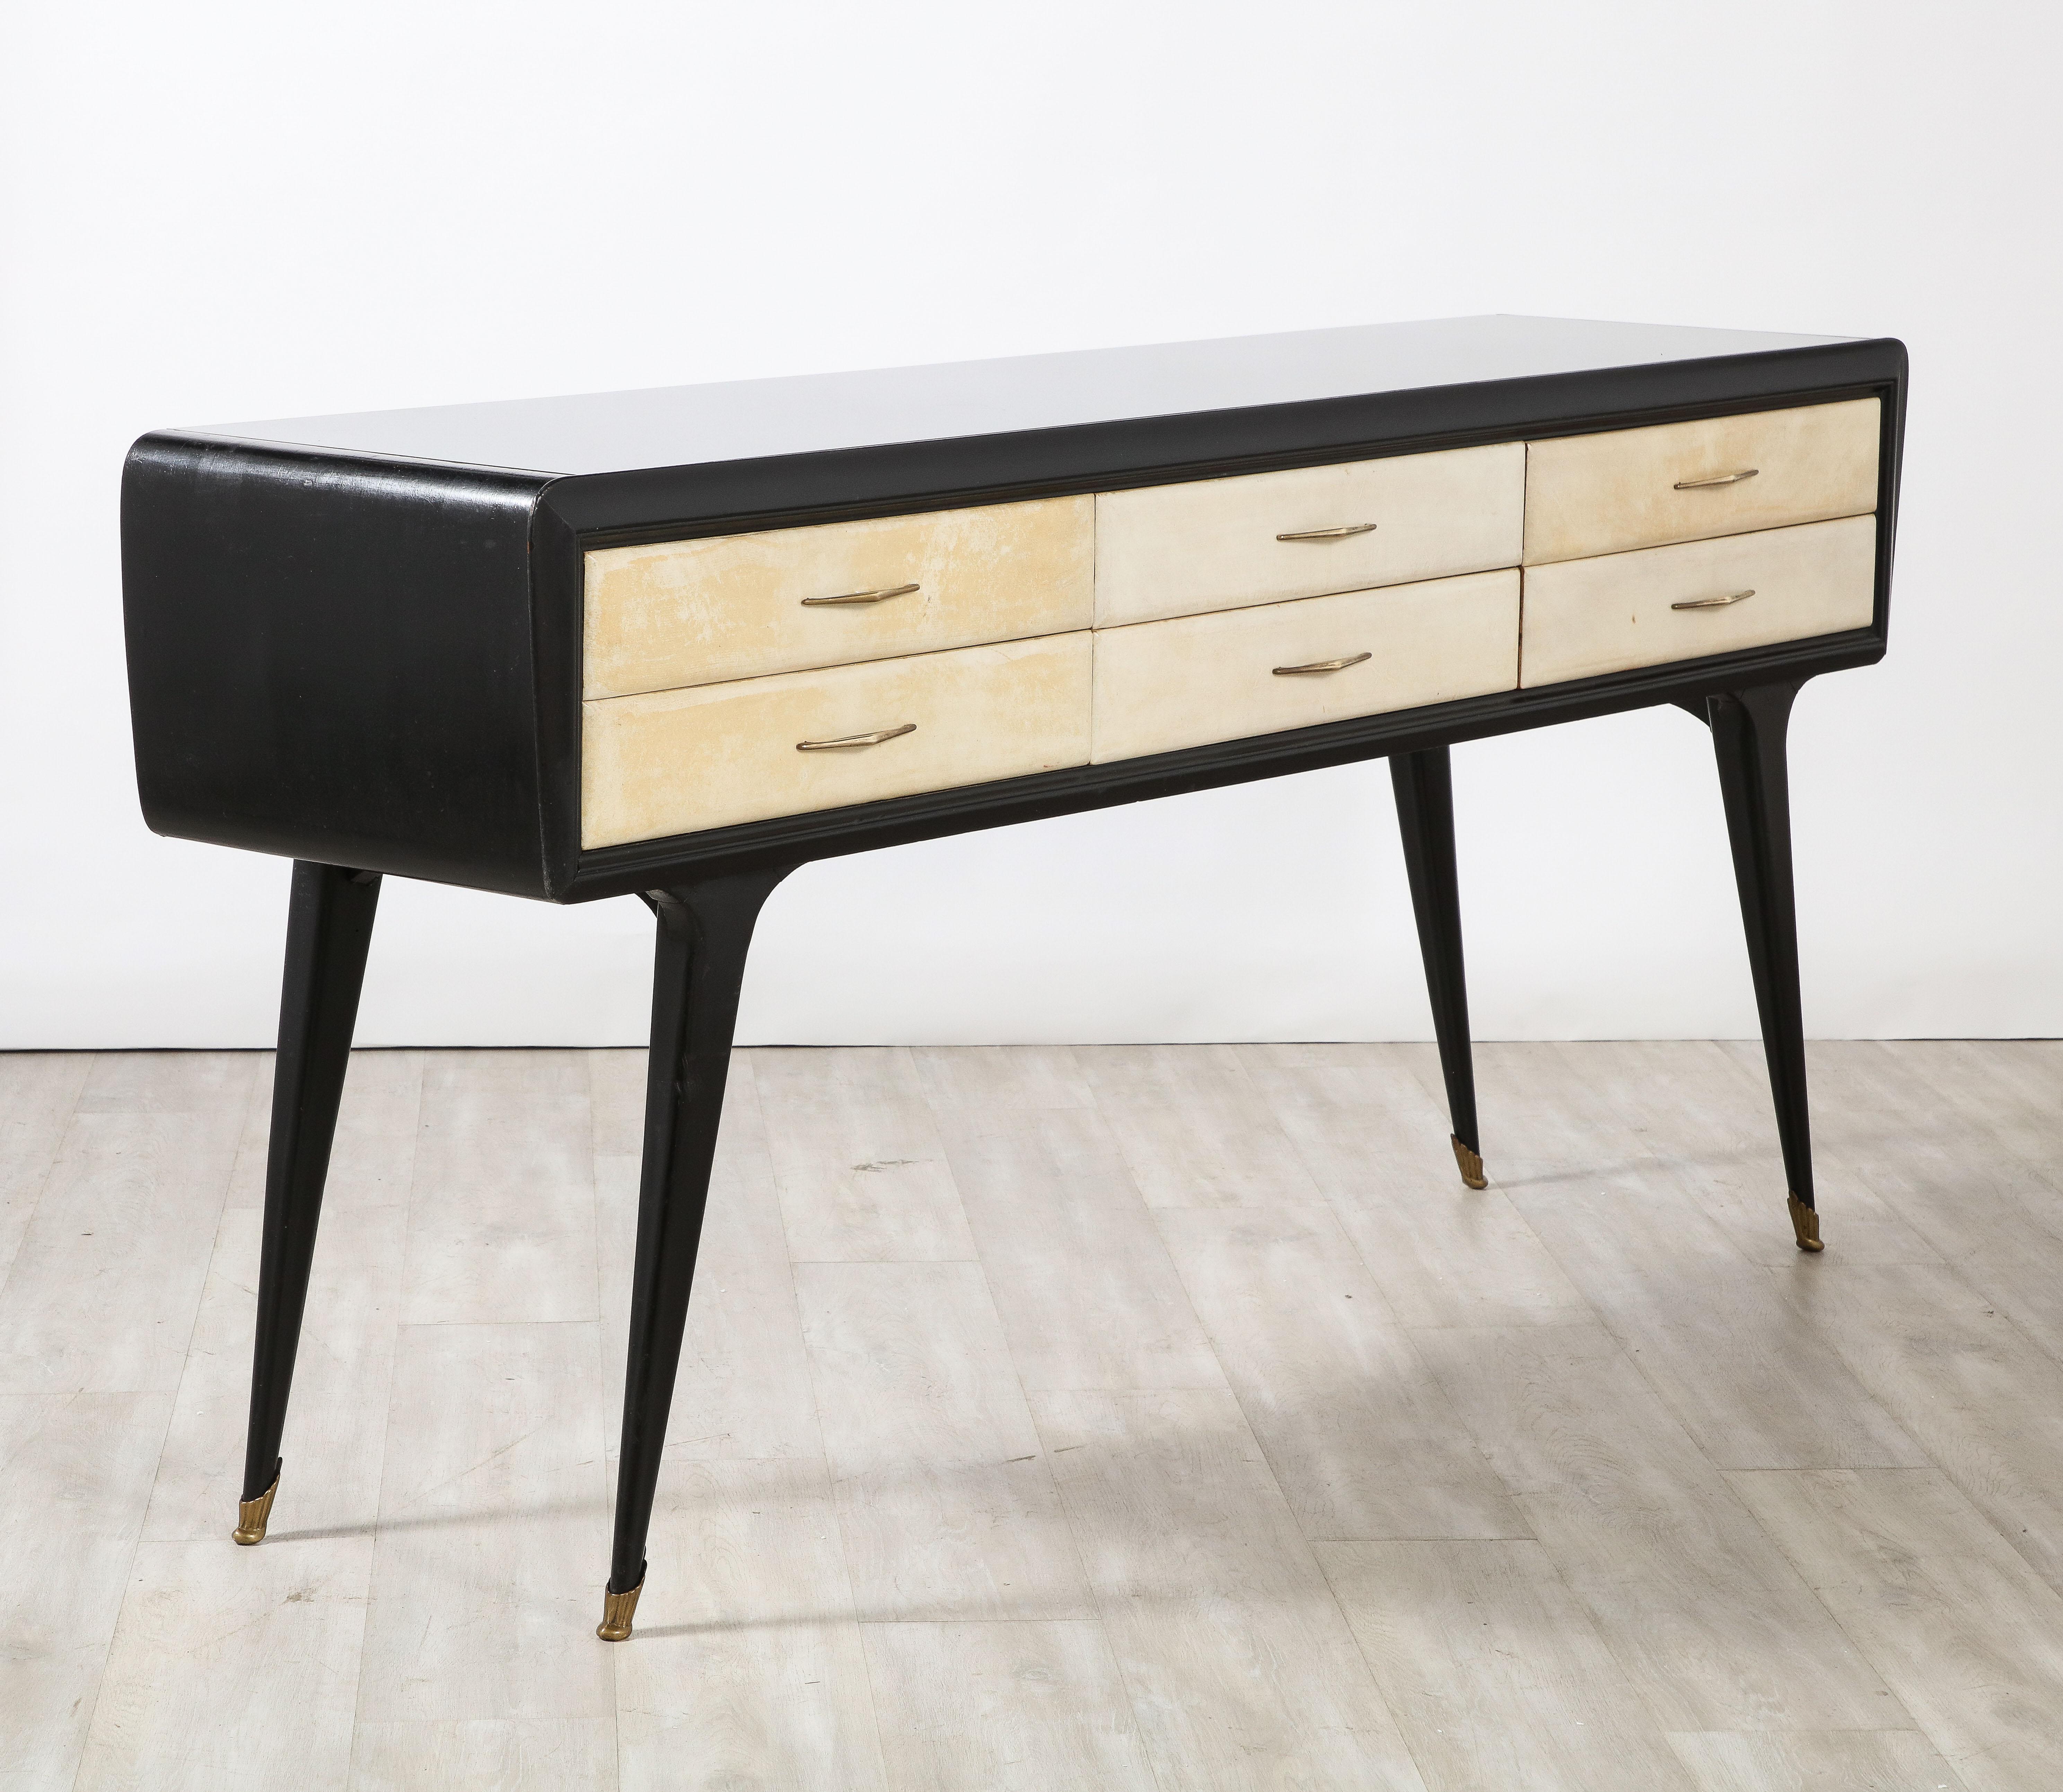 Italian Art Deco Ebonized and Vellum Sideboard with Inset Glass Top, circa 1940 For Sale 12